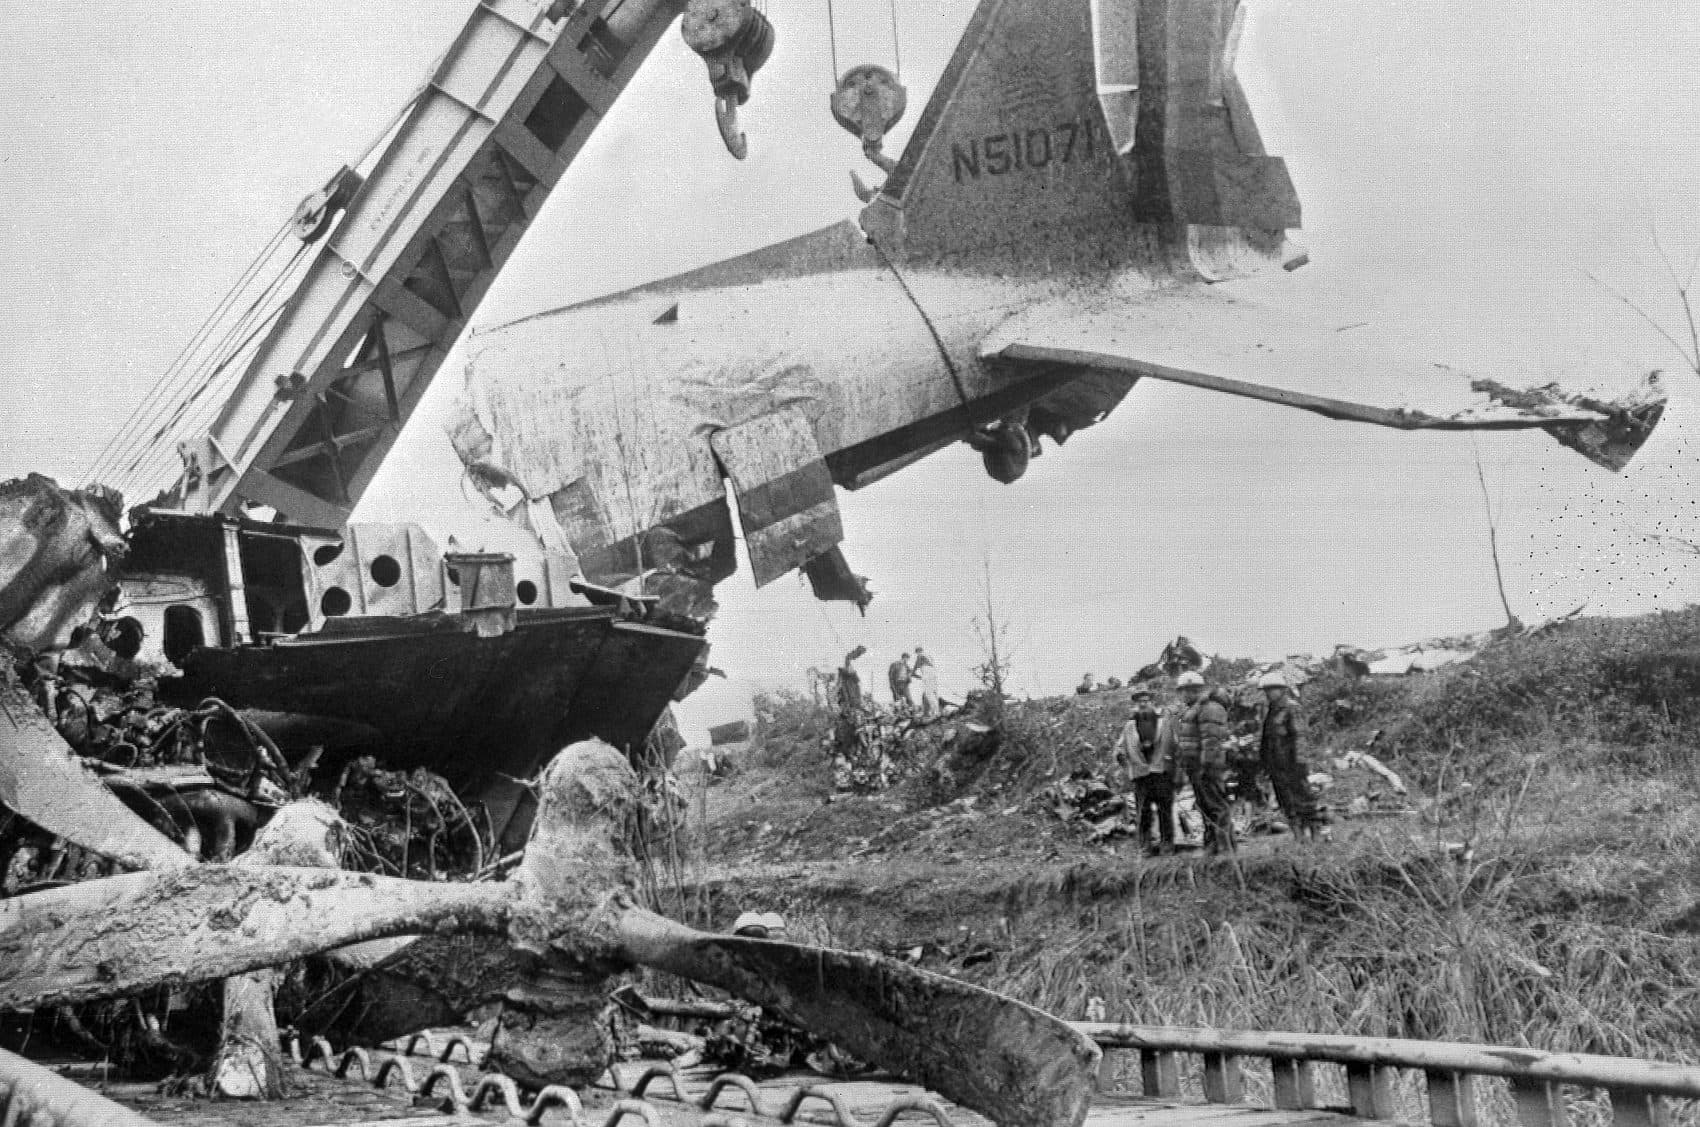 Workers watch as a large crane swings the tail seciton of the wrecked DC-3 on to a flatbed car as the remains of the plane are cleared away at Dress Regional Airport in Evansville, Ind., Dec. 16, 1977. (Chuck Robinson/AP)